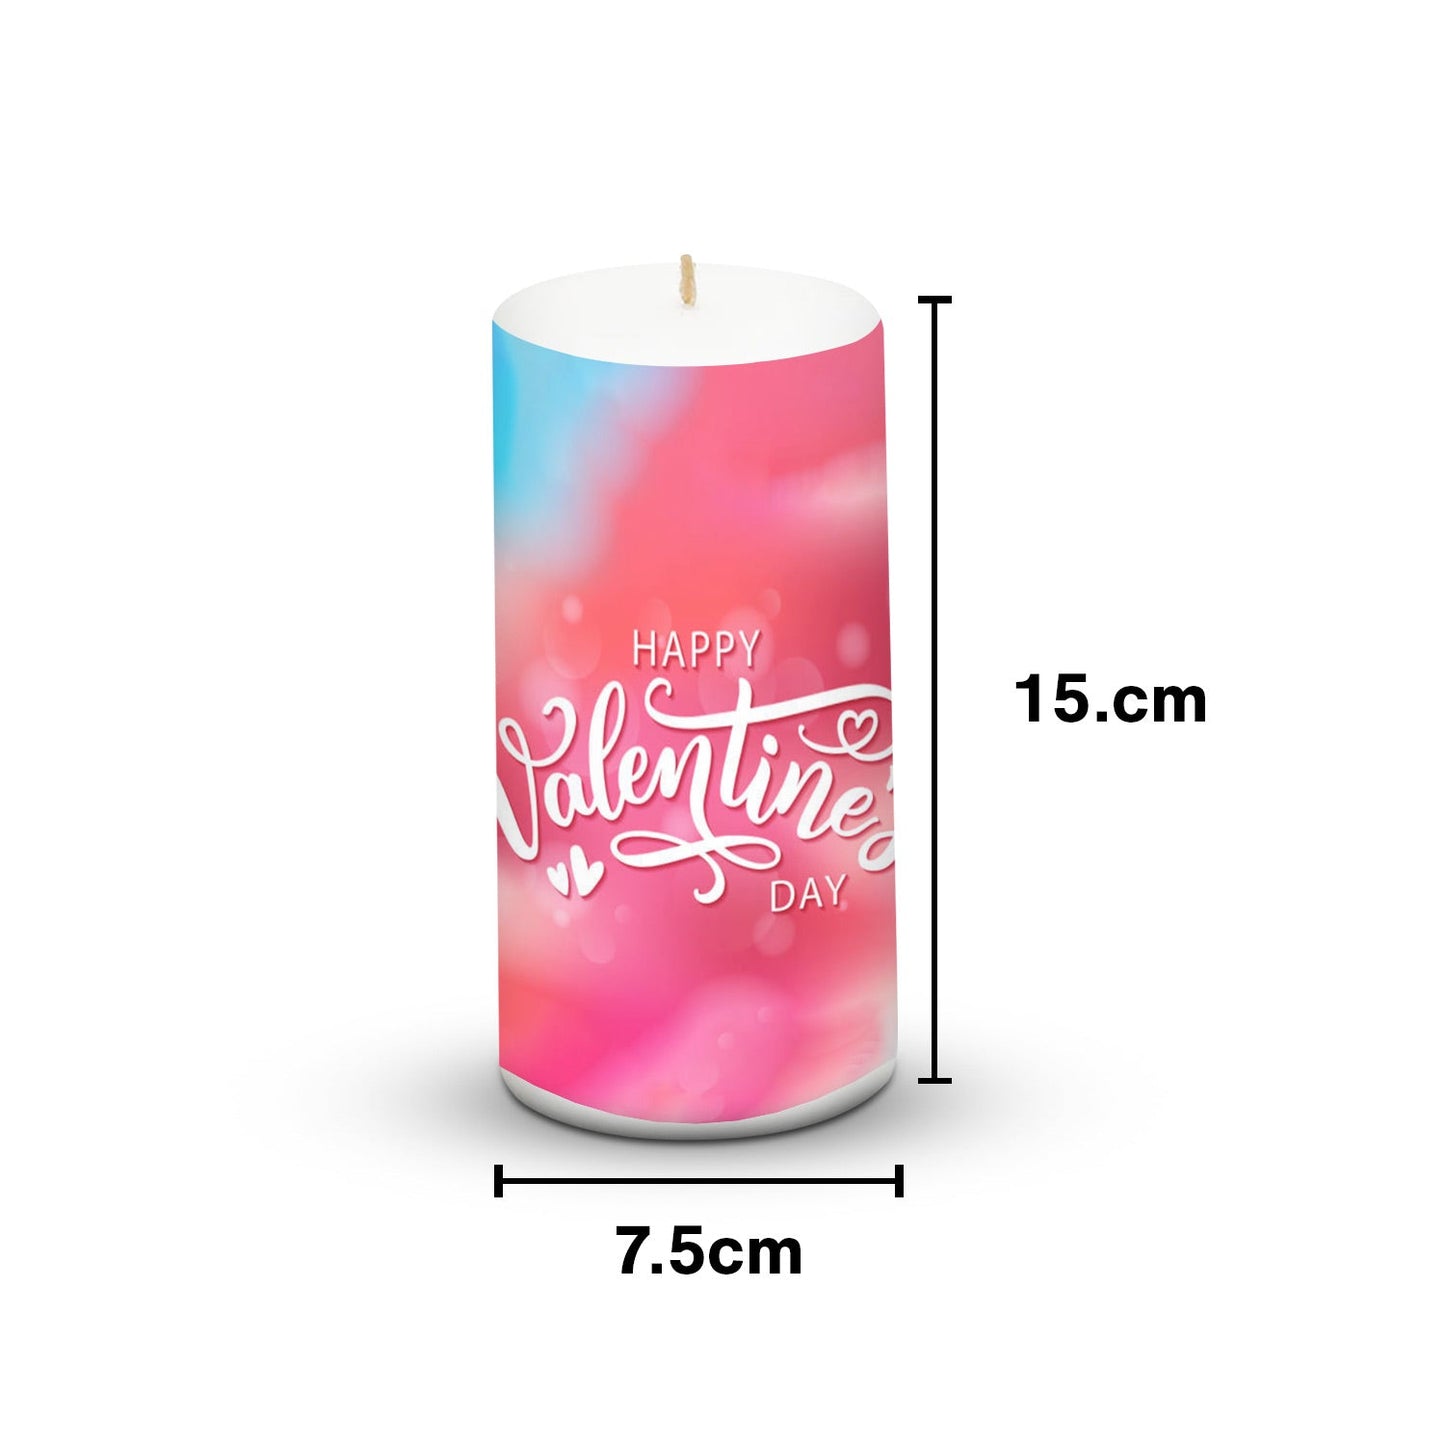 Pink Pillar Candle For Valentines Special 3*6 inch Unscented.